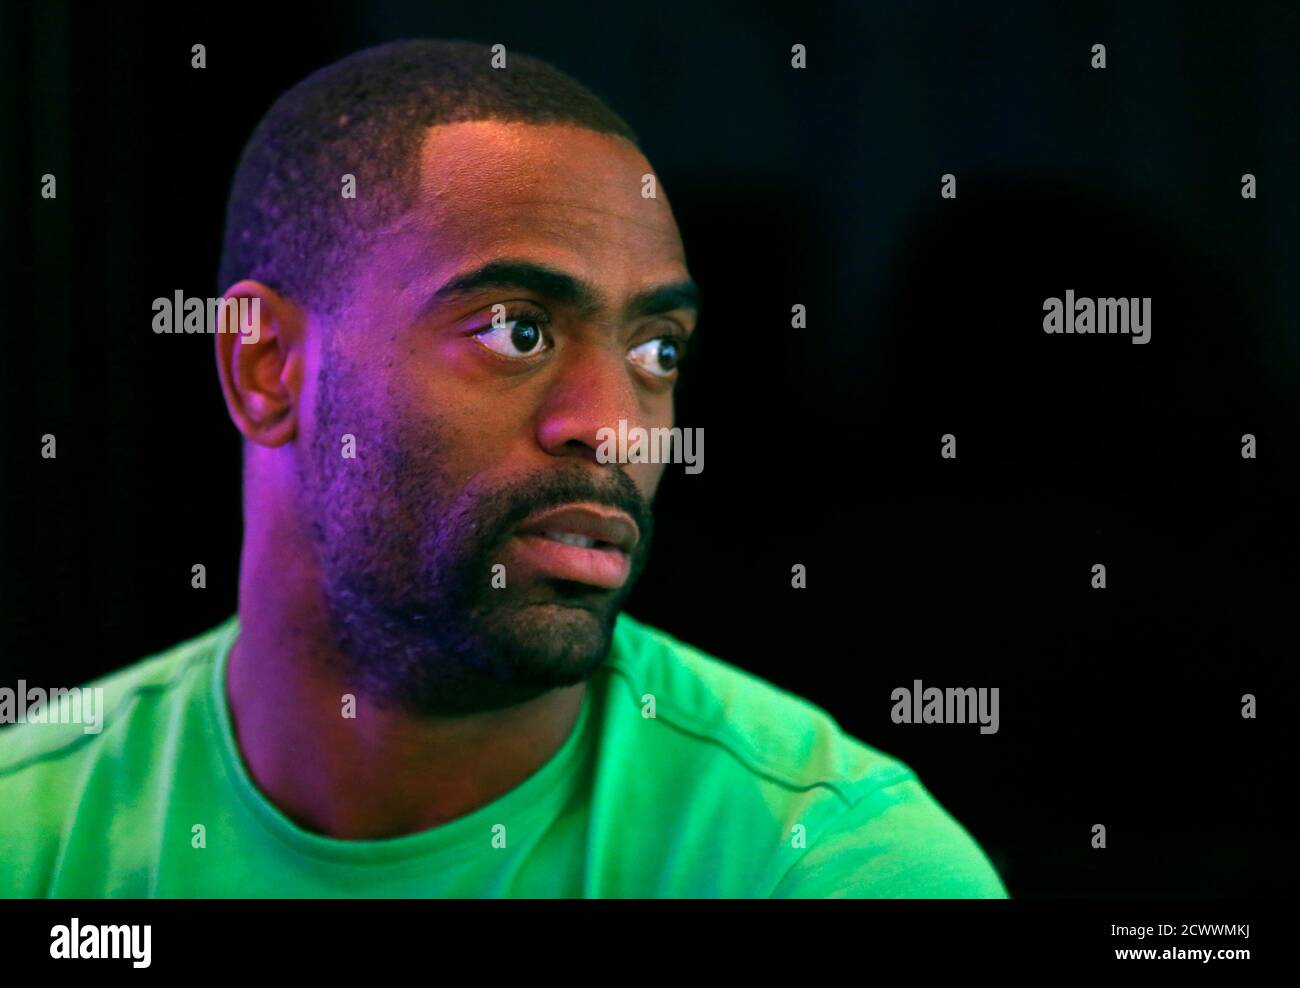 U.S. sprinter Tyson Gay speaks to reporters at the U.S. Olympic athletics trials in Eugene, Oregon June 21, 2012. Soft-spoken and humble, Gay seems so different from most modern-day sprinters. He seldom raises his voice, rarely if ever makes bold predictions and generally keeps a low profile outside his passion for social media. Yet, he can sprint, and no American has ever run faster. Picture taken June 21. To match story US-OLY-ATHL-GAY-PROFILE           REUTERS/Mike Blake  (UNITED STATES - Tags: SPORT OLYMPICS) Stock Photo